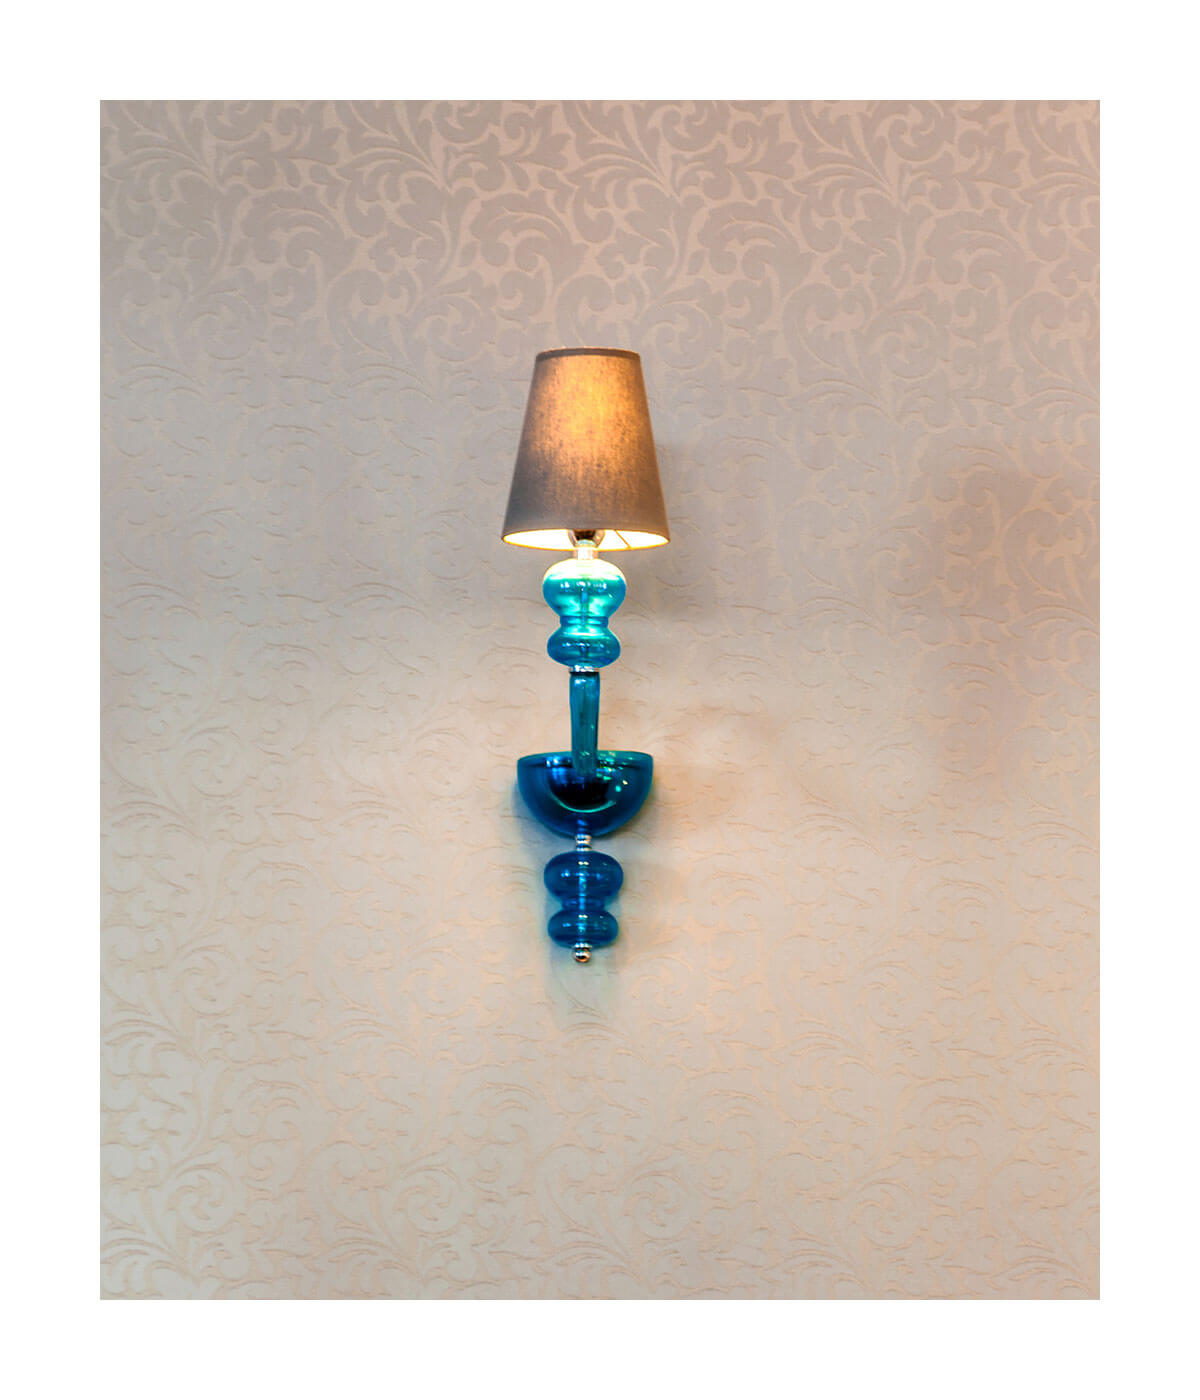 Decorative sconces are used by interior designers to create intimacy.